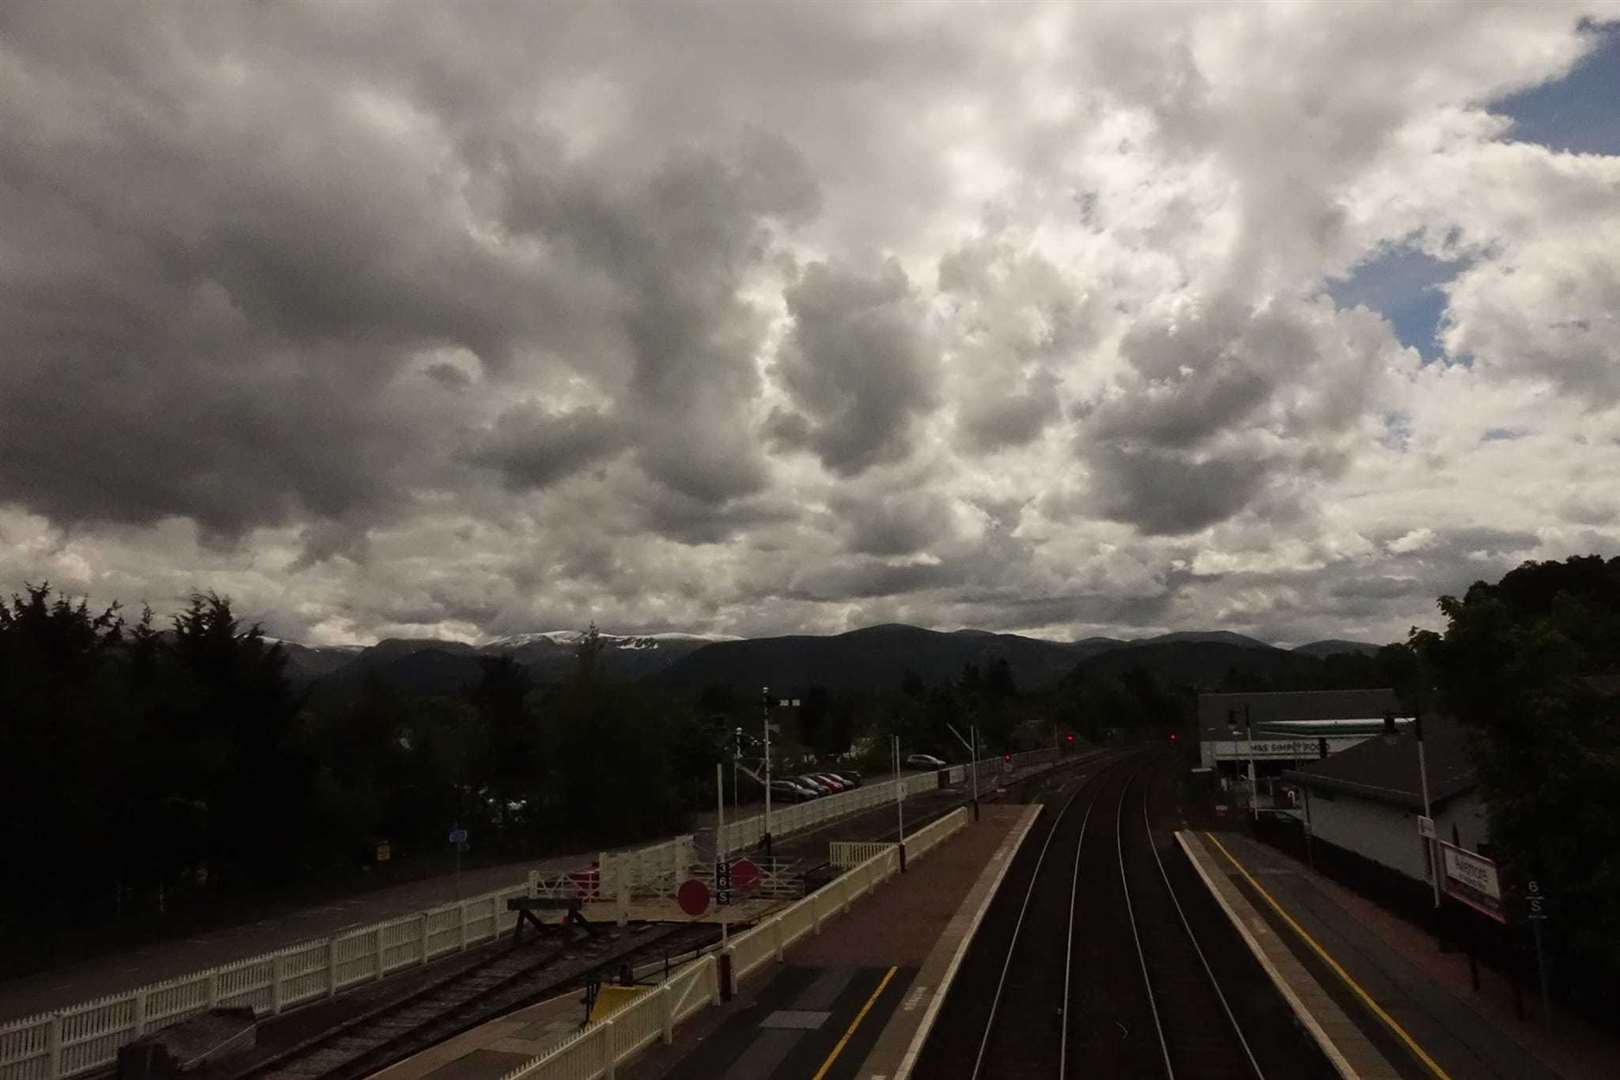 Aviemore Station awaits - with half-price tickets